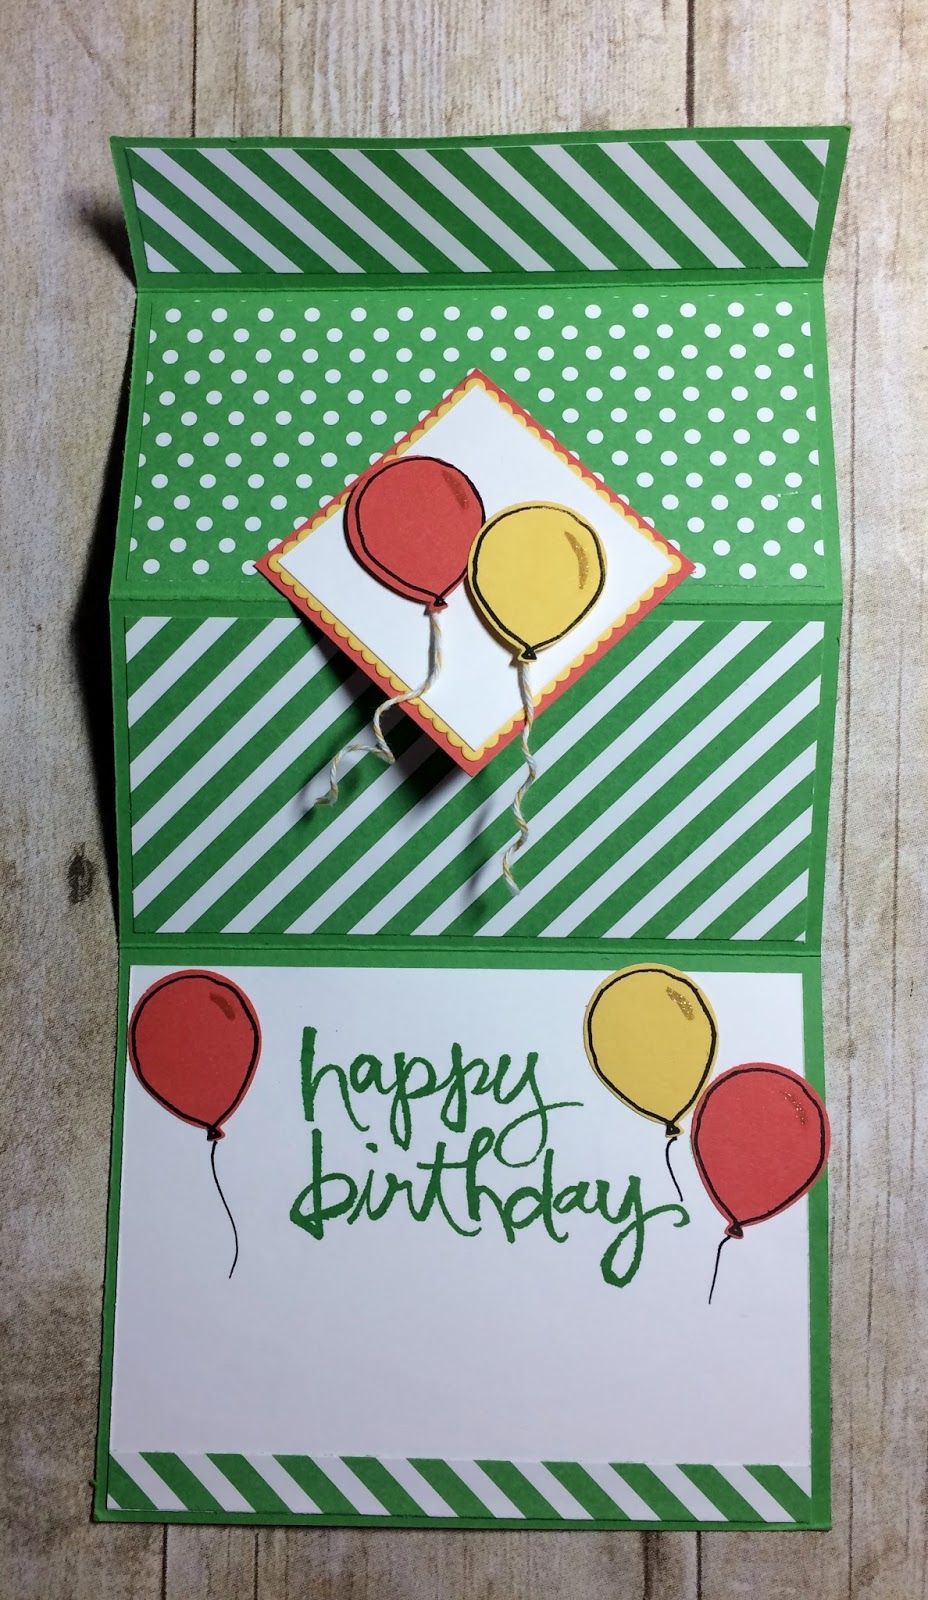 kards-by-kadie-birthday-fold-out-card